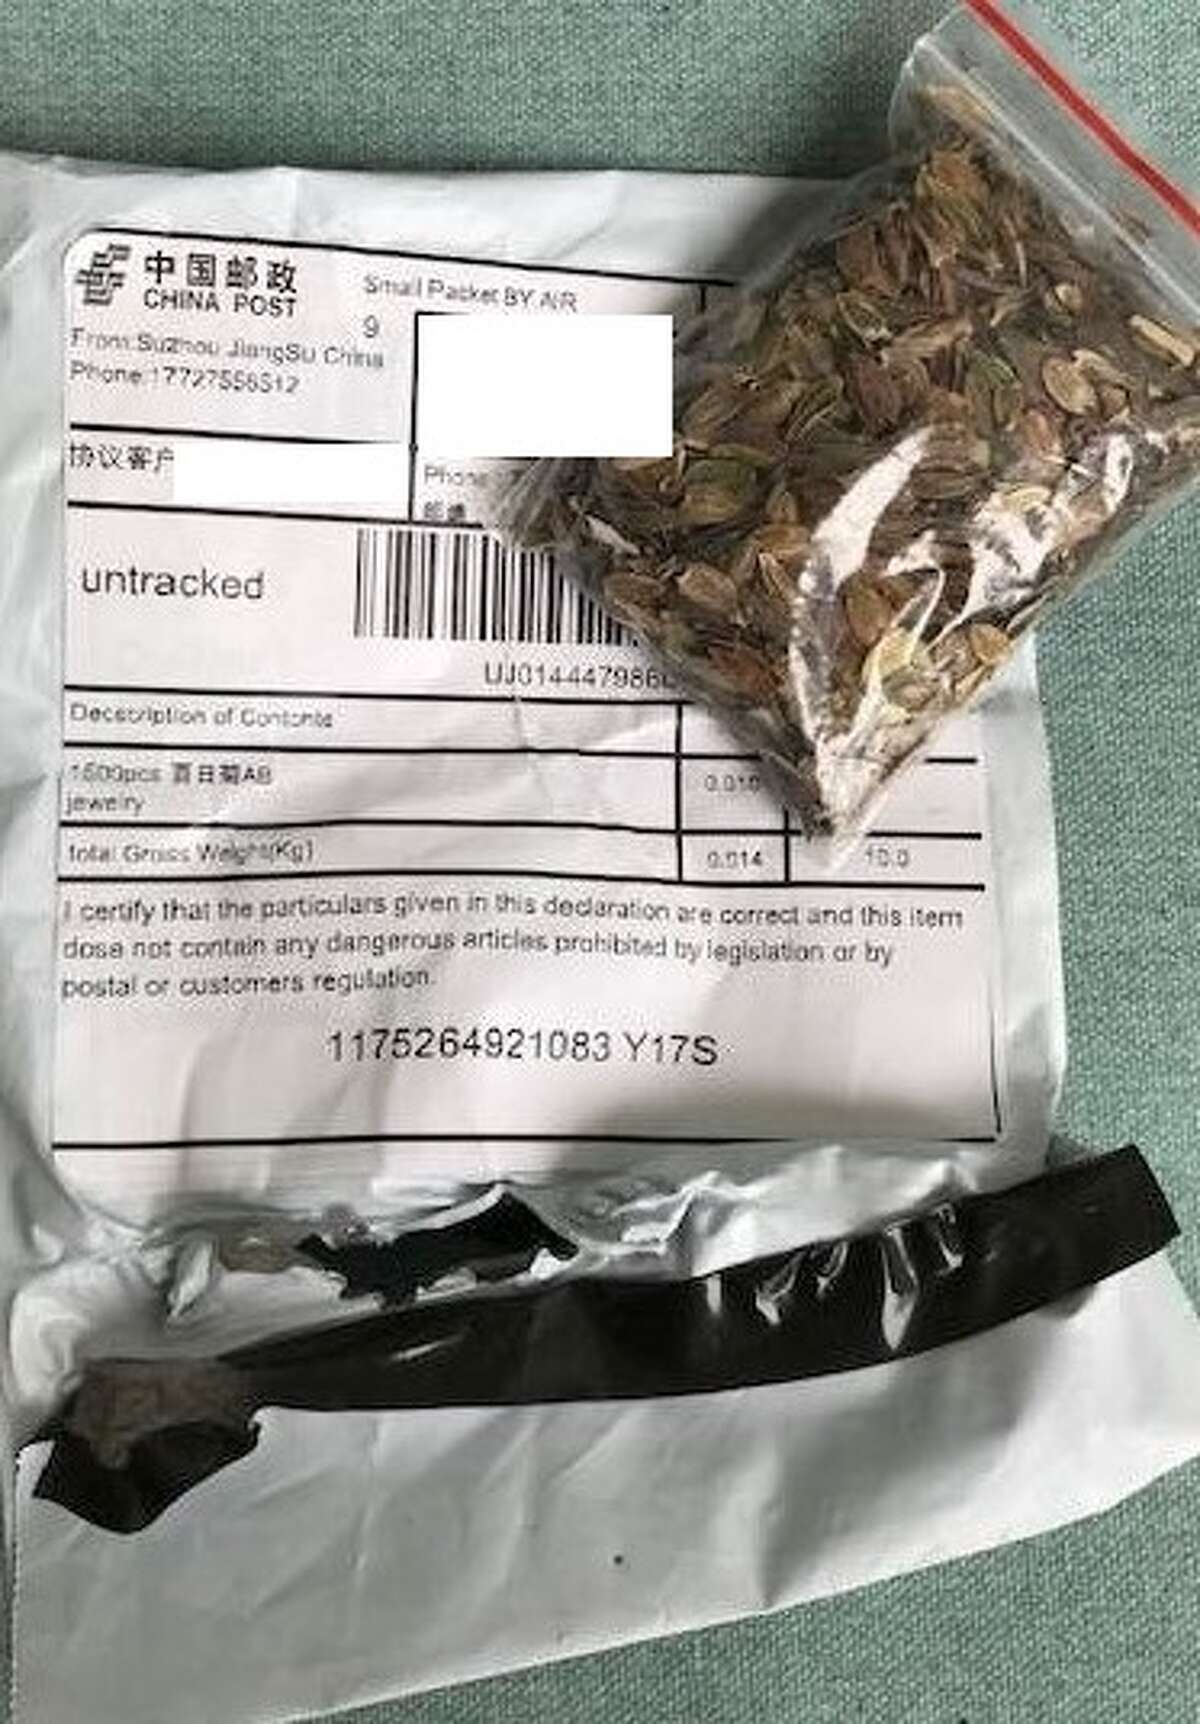 Officials are warning residents to not plant seeds sent from China.